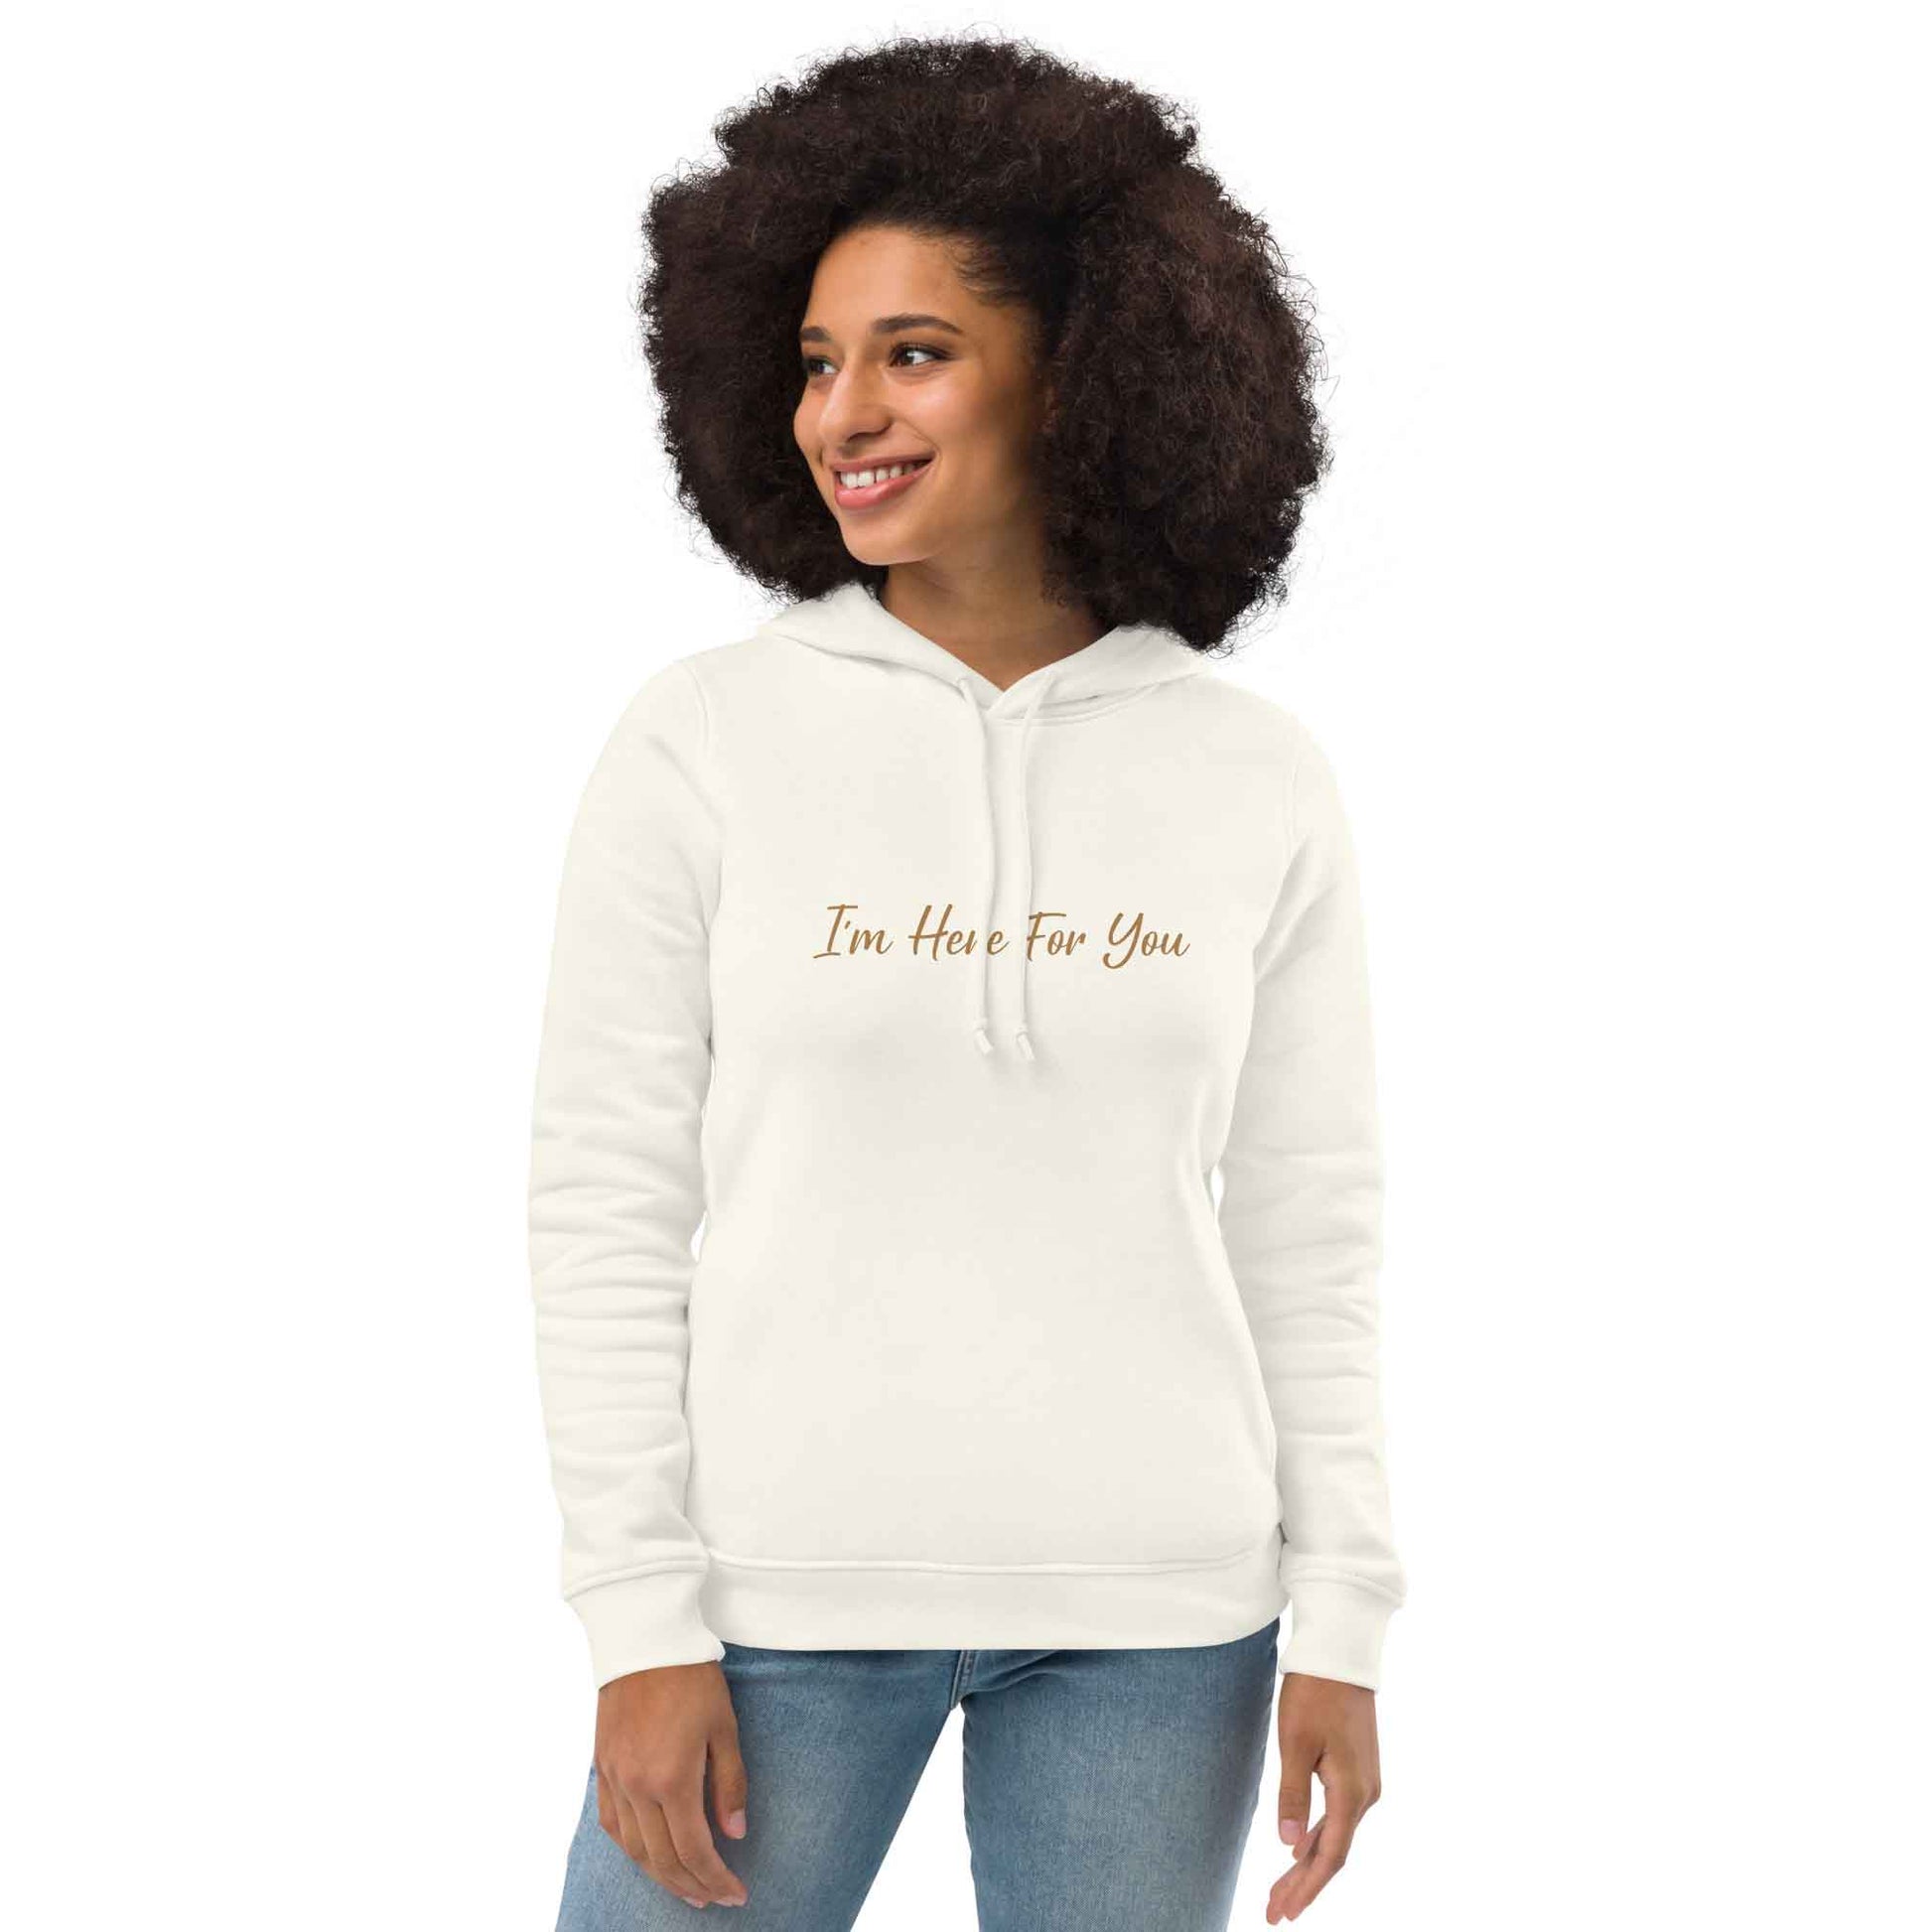 Women off-white organic cotton hoodie with inspirational quote, "I'm Here For You."